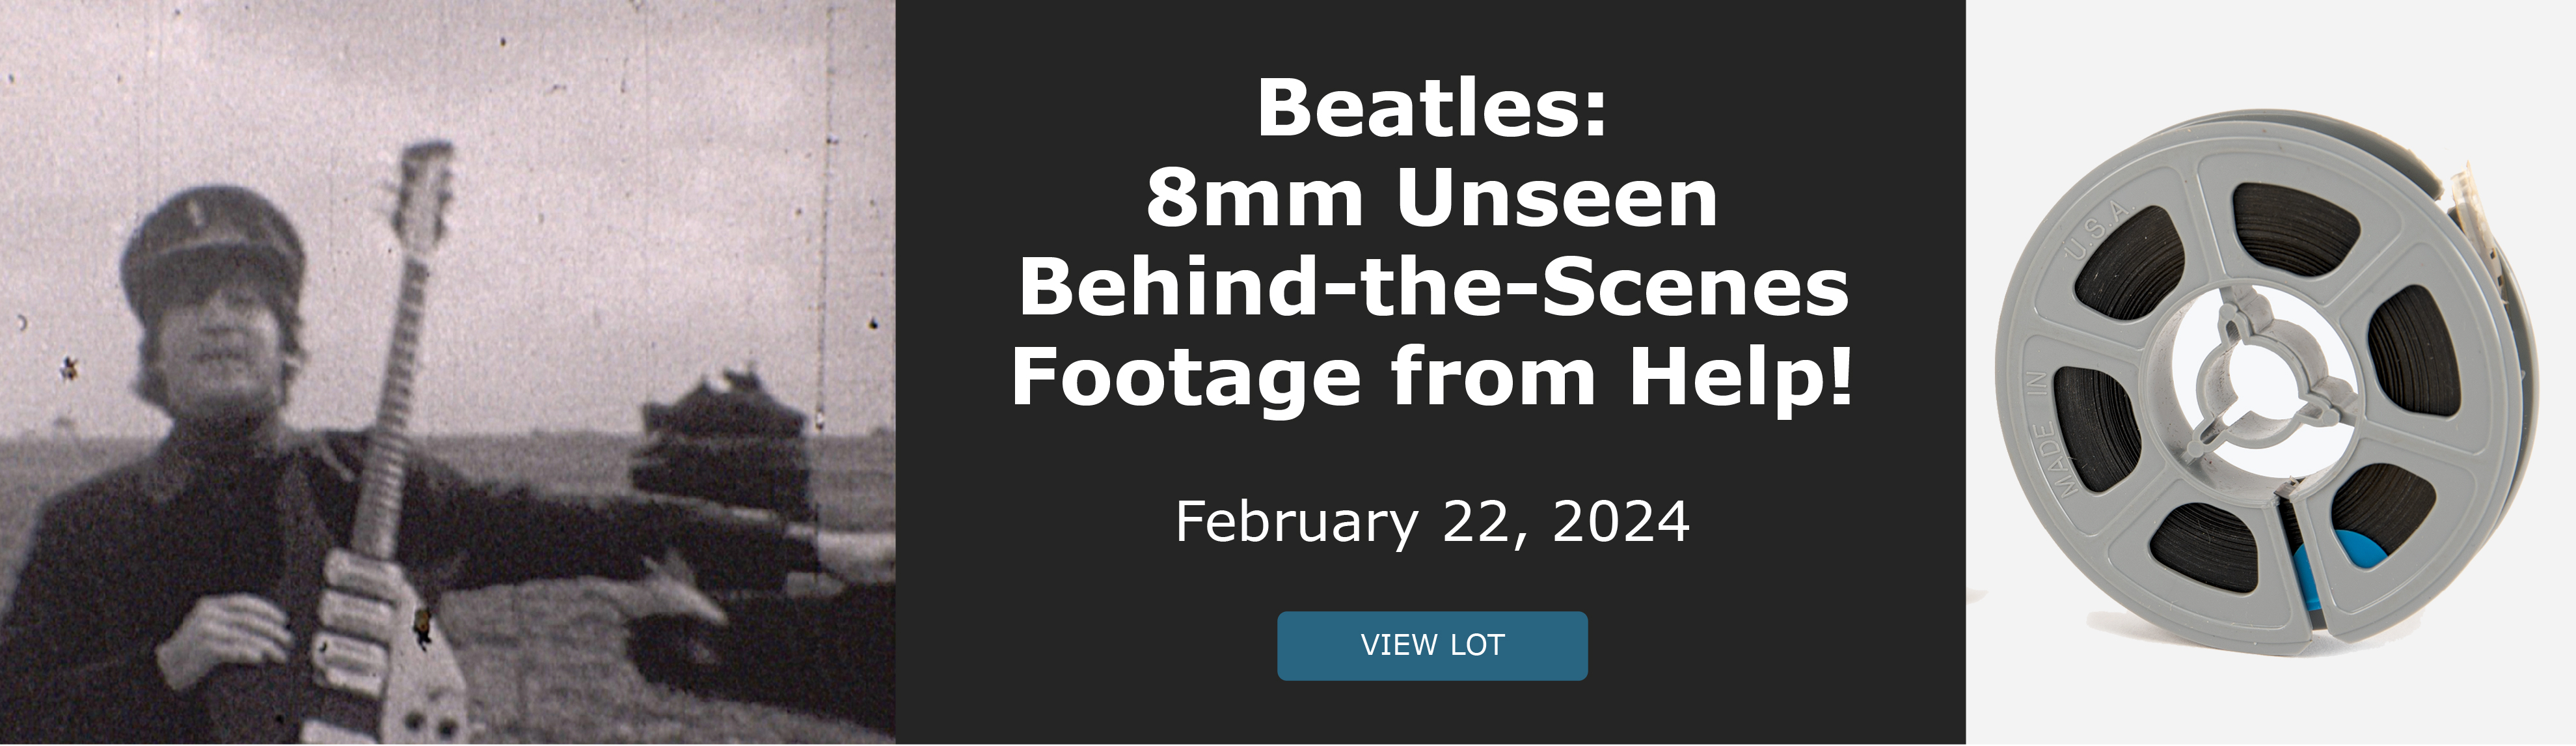 Beatles: 8mm Unseen Behind-the-Scenes Footage from Help! Bidding closes February 22. View Lot!